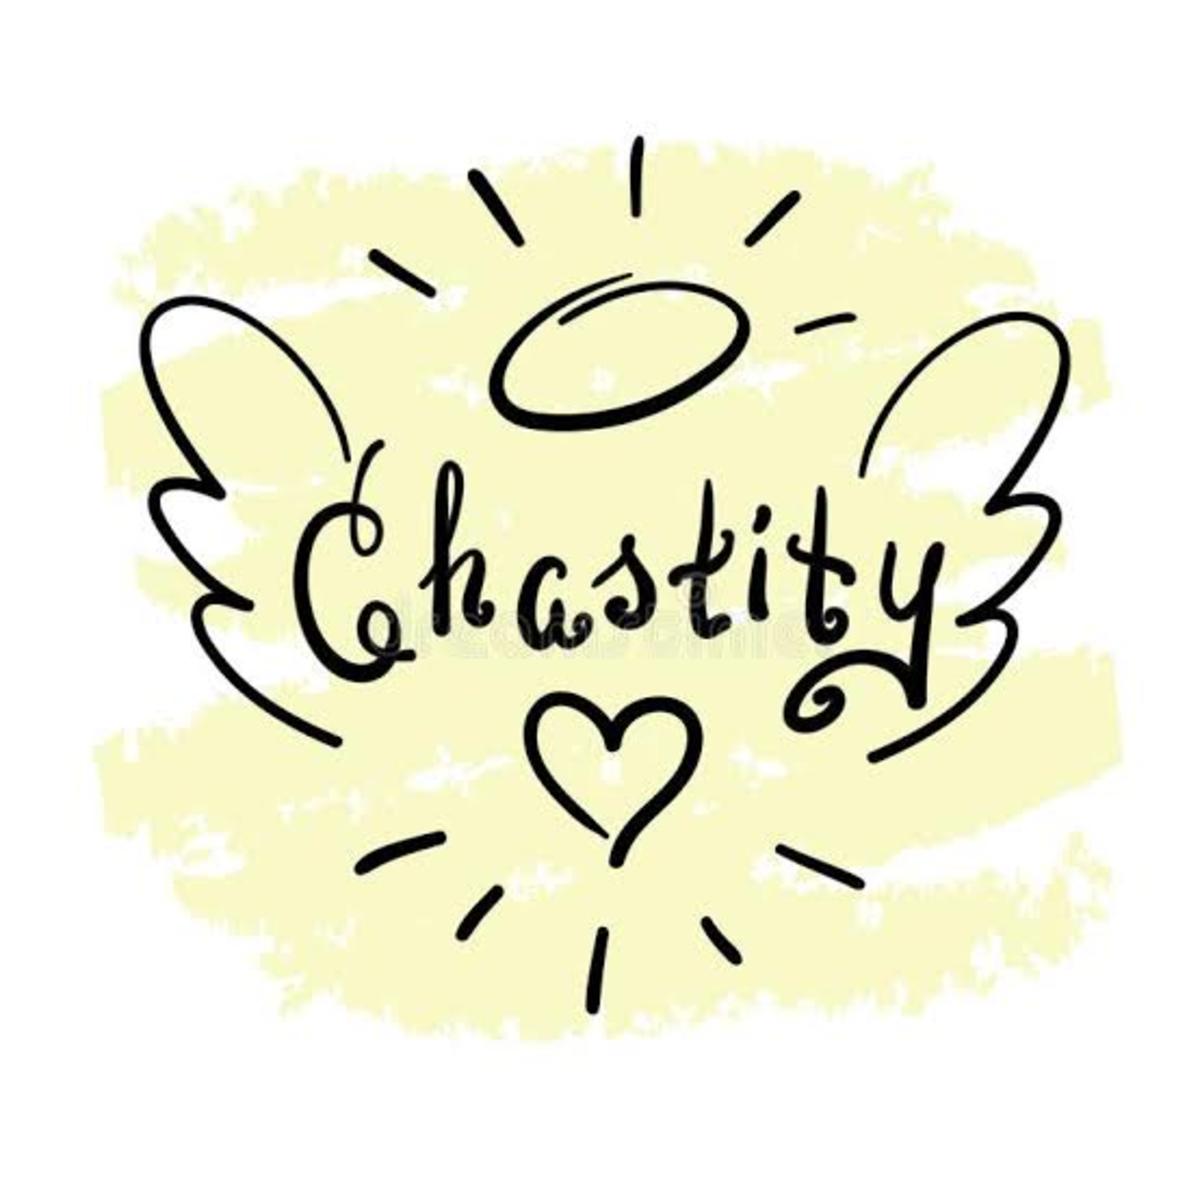 Chastity and Unchastity